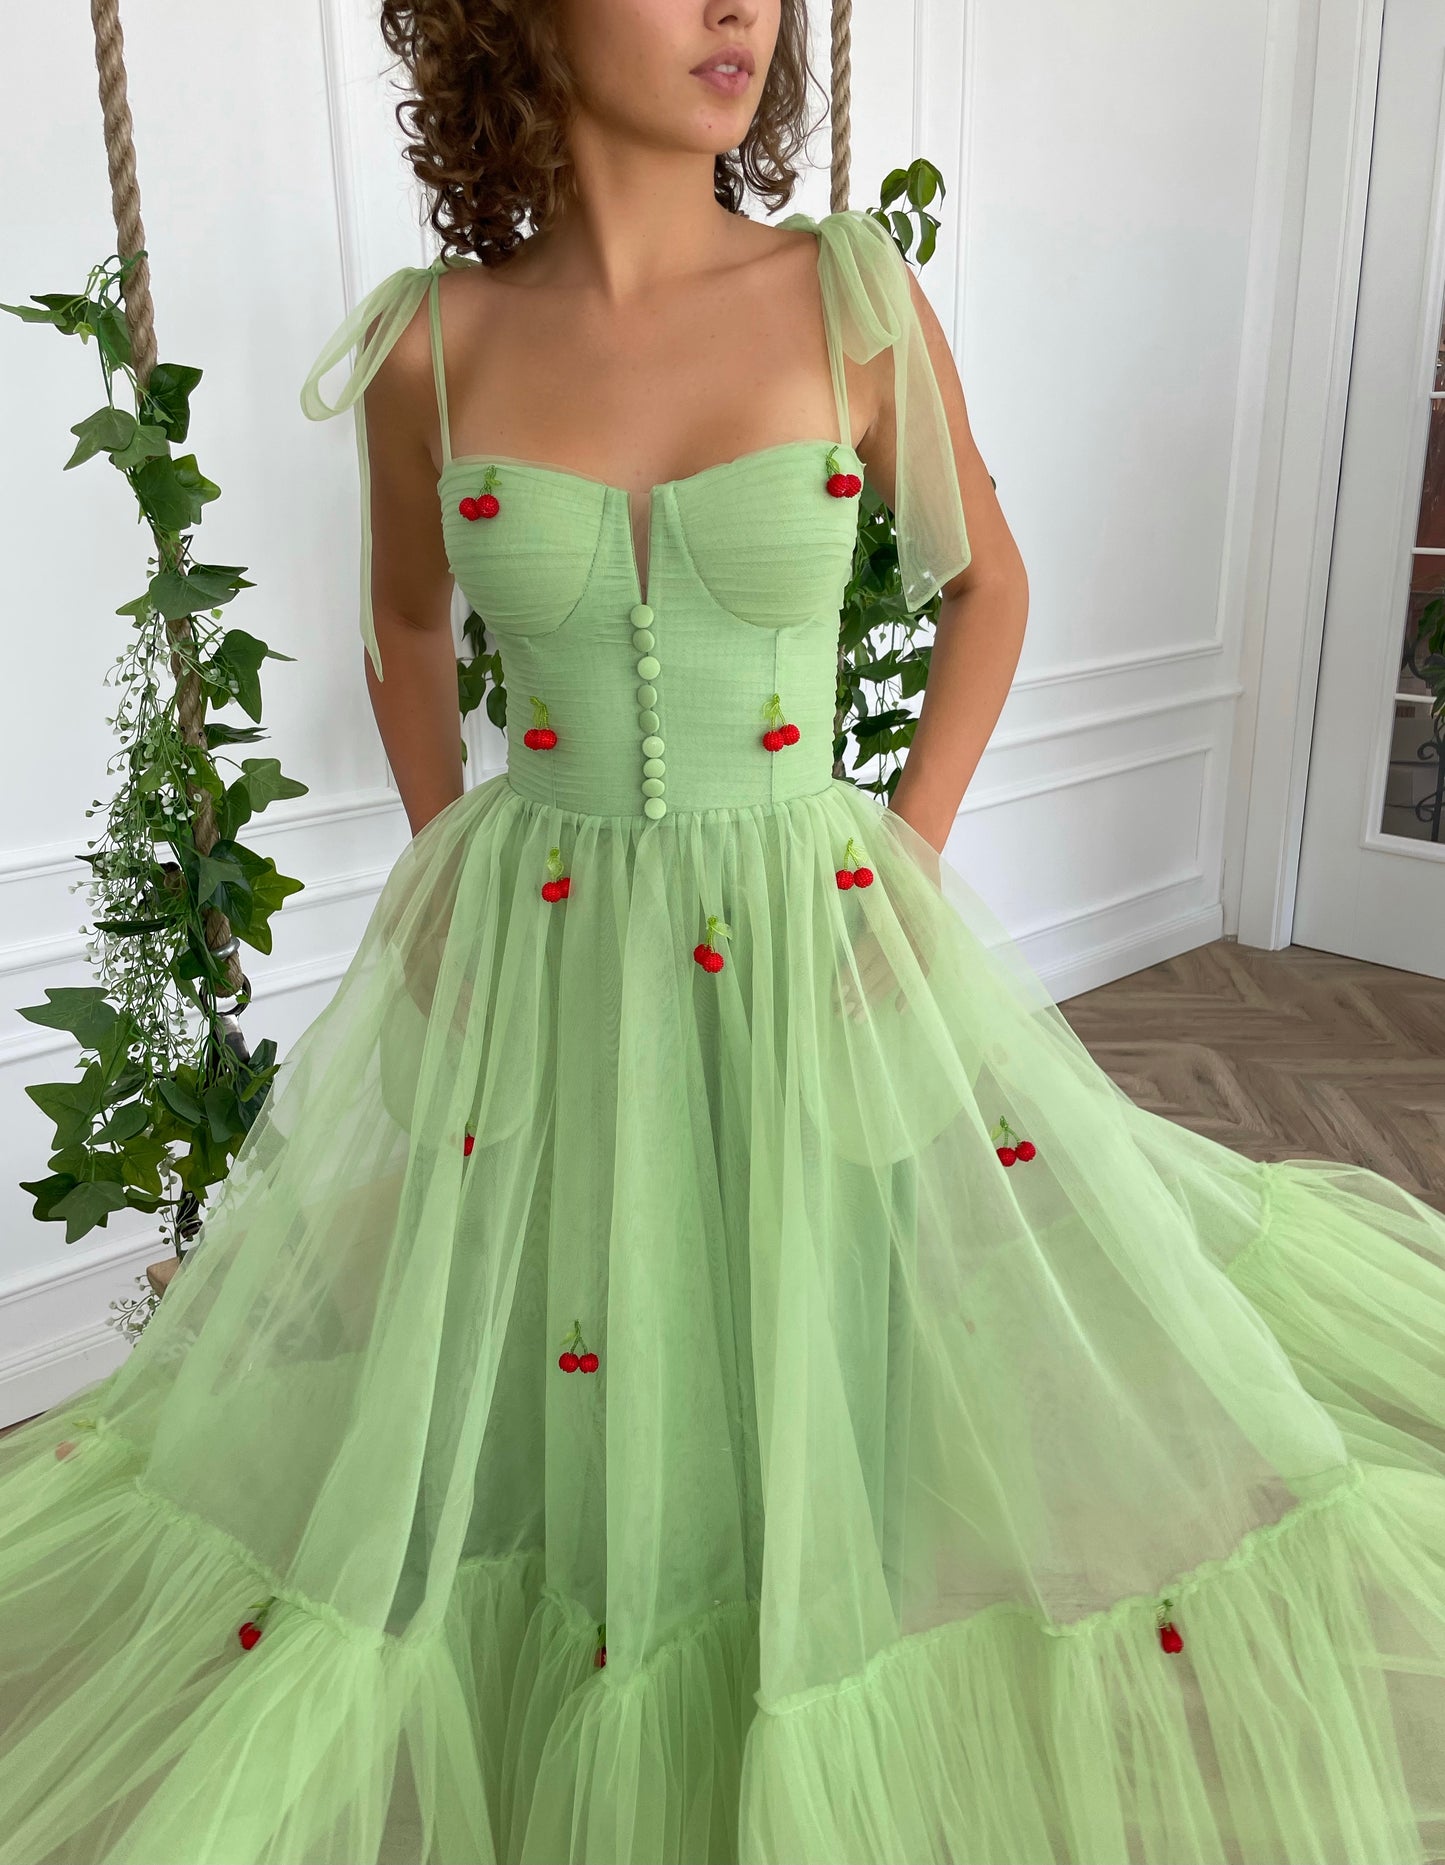 Green midi dress with bow straps and embroidered cherries